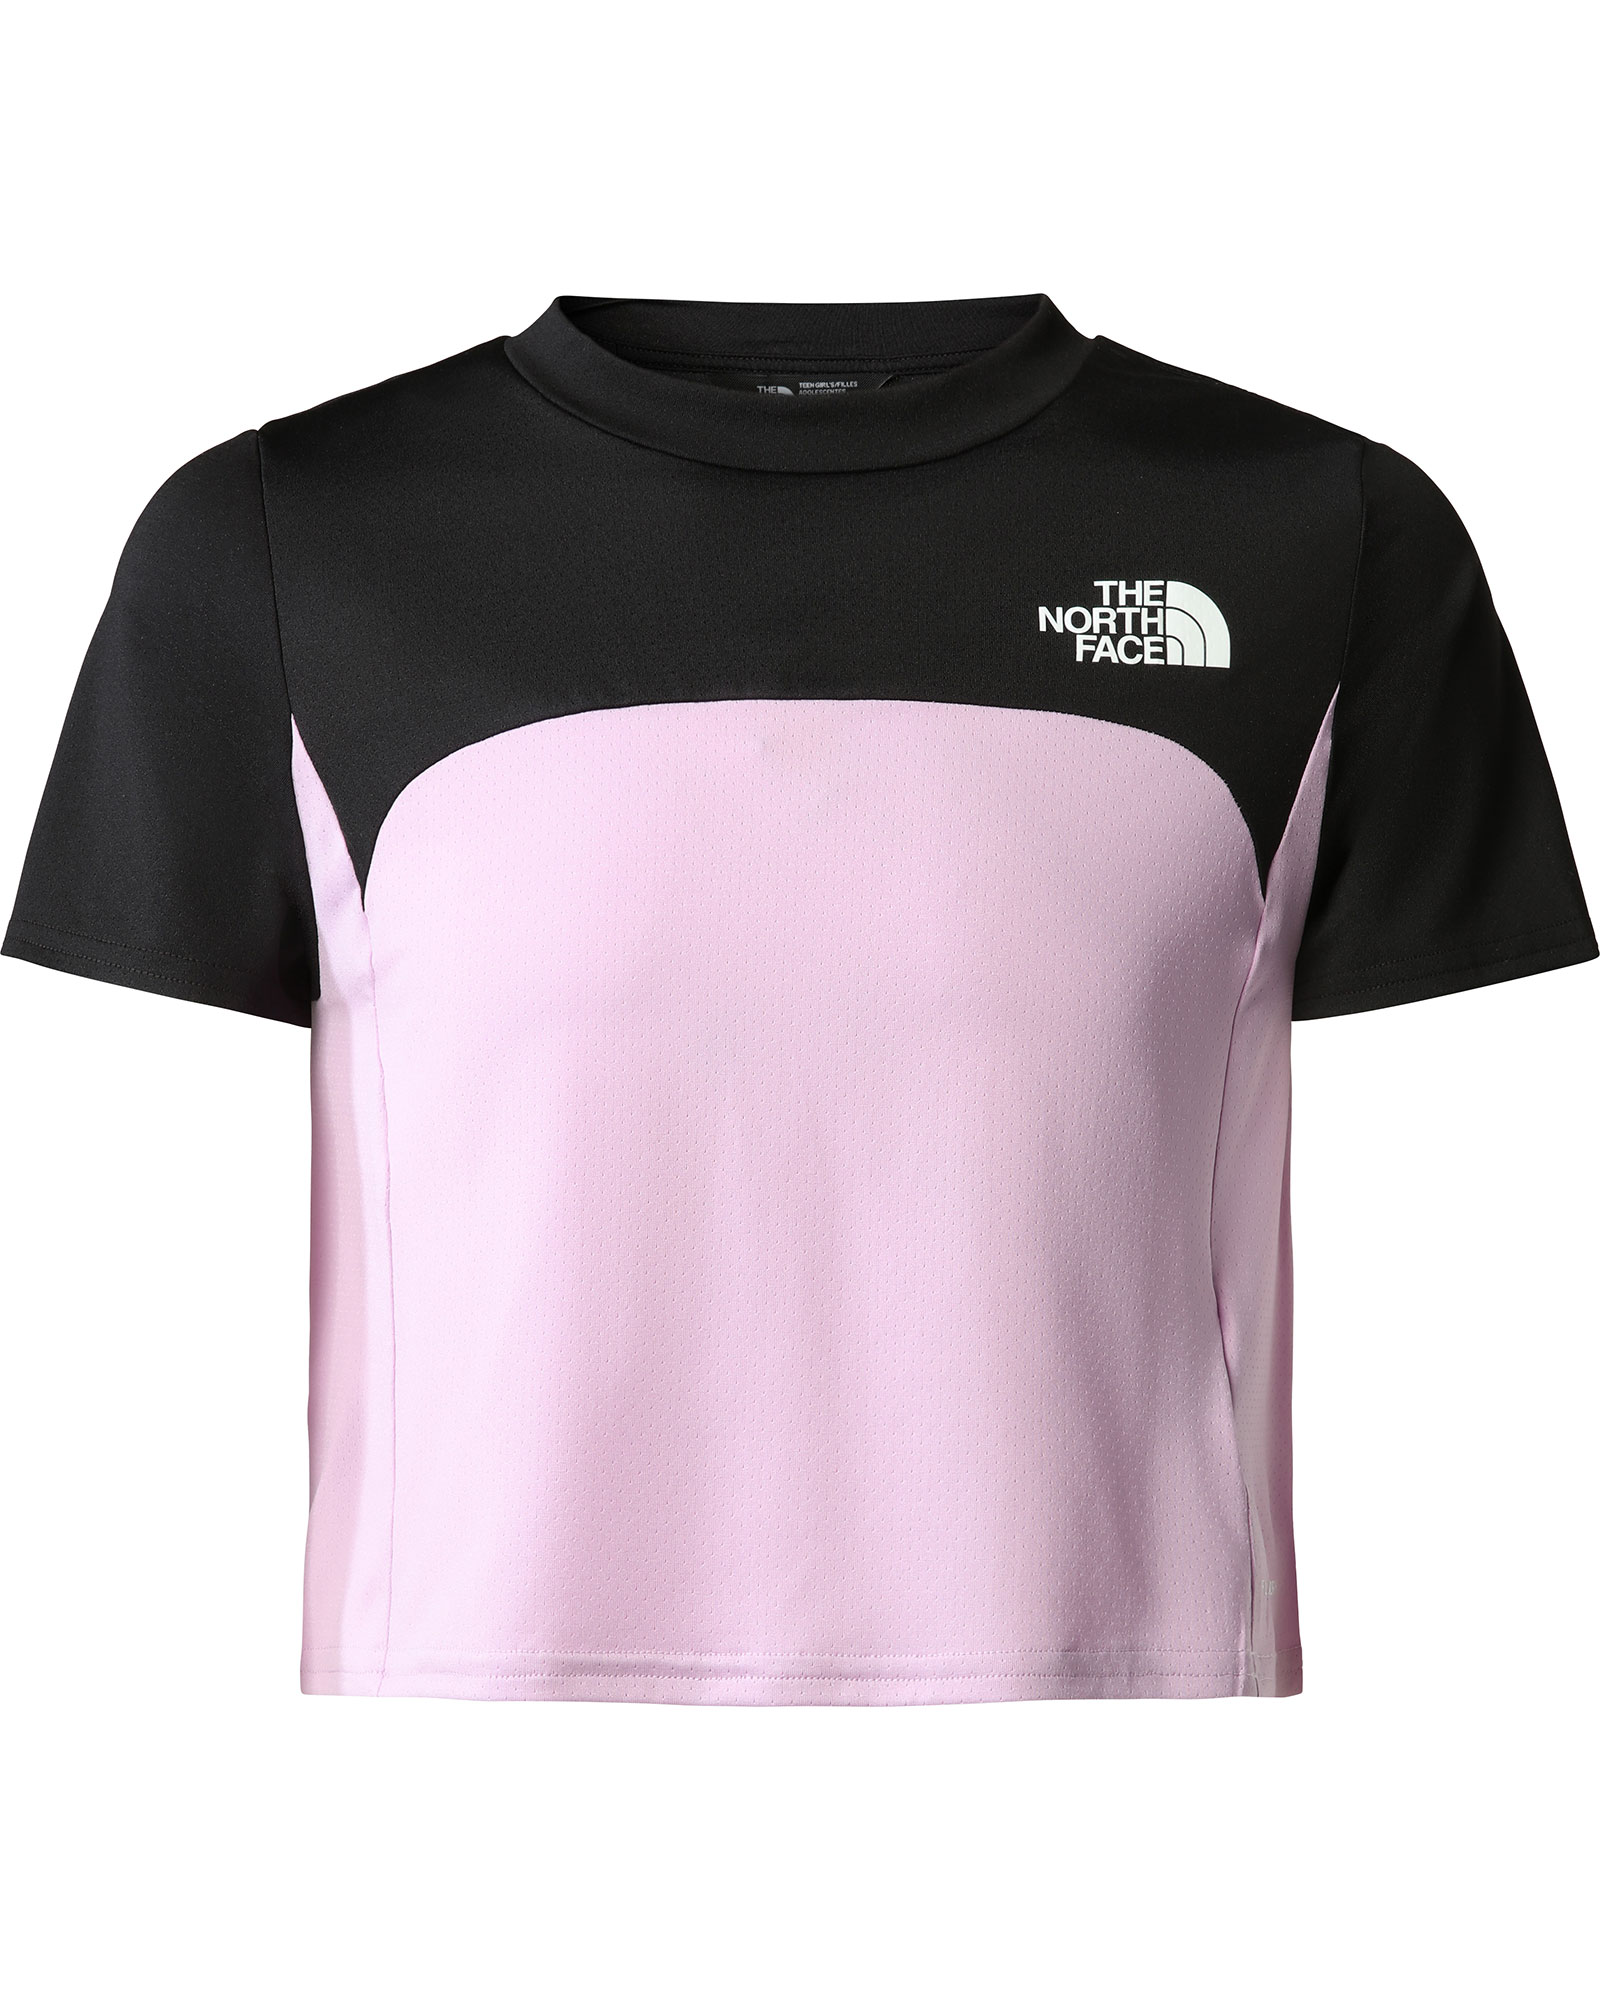 The North Face Girl's Mountain Athletics T-Shirt